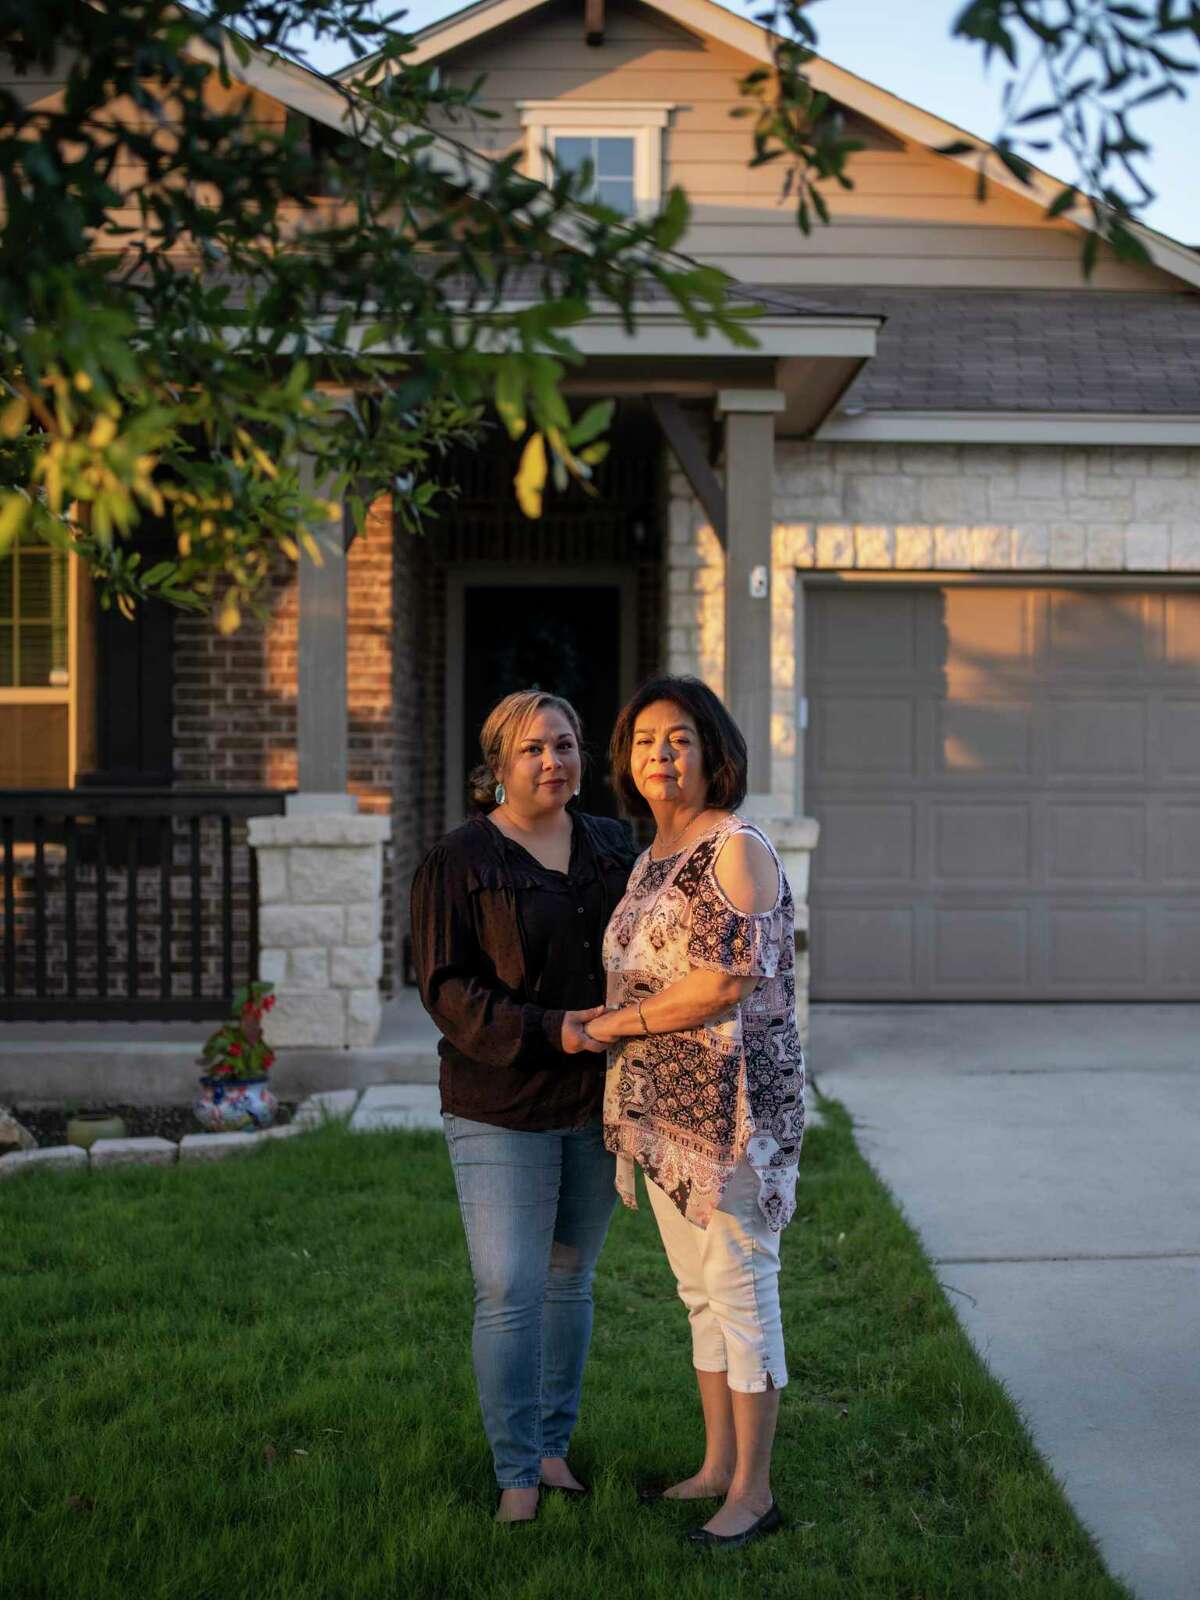 Dora Farias, right, stands for a portrait with her daughter Shekinah Barrientez, left, at Barrientez’s home in New Braunfels on Thursday, May 20. After contracting COVID-19 during summer 2020, Farias was treated with nasal high-flow therapy that she and her daughter credit with her eventual recovery from the illness.